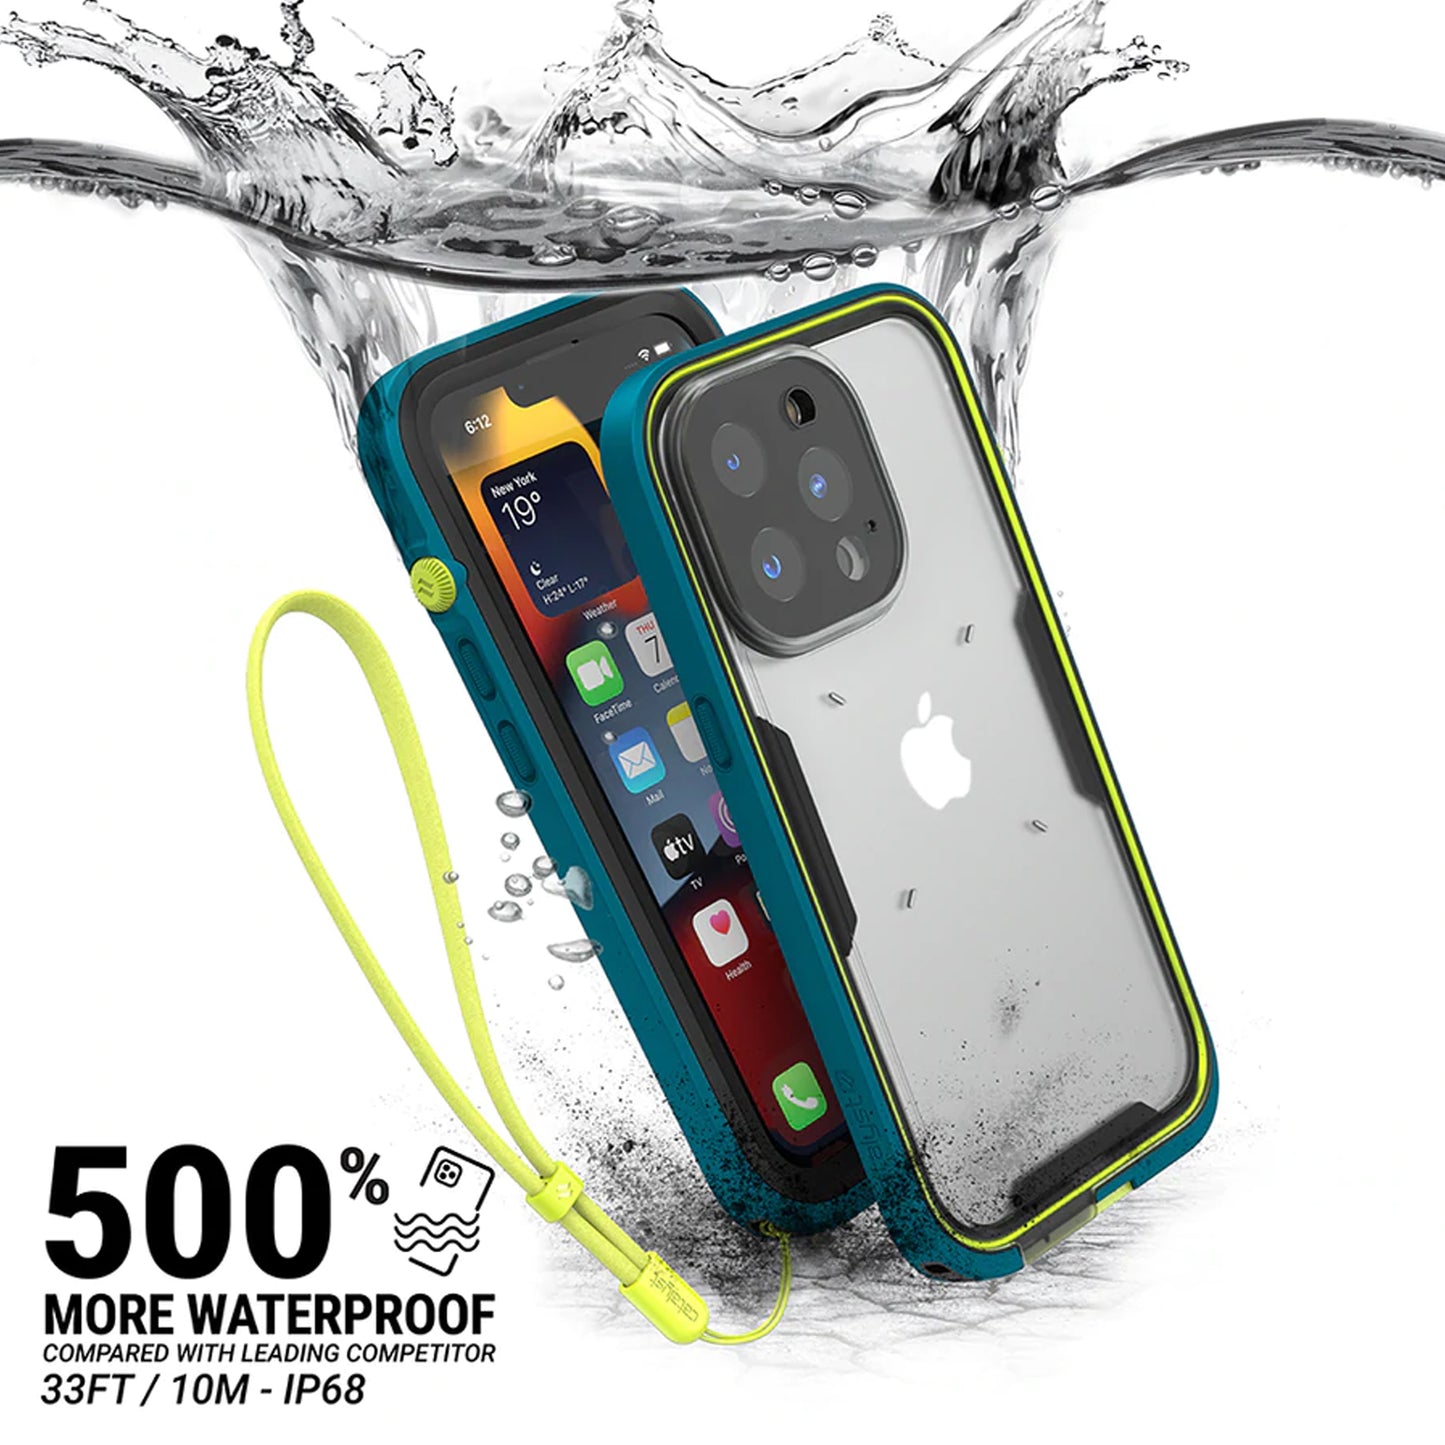 Catalyst Total Protection Waterproof Case for iPhone 13 6.1" 5G - Stealth Black (Barcode: 840625112210 )